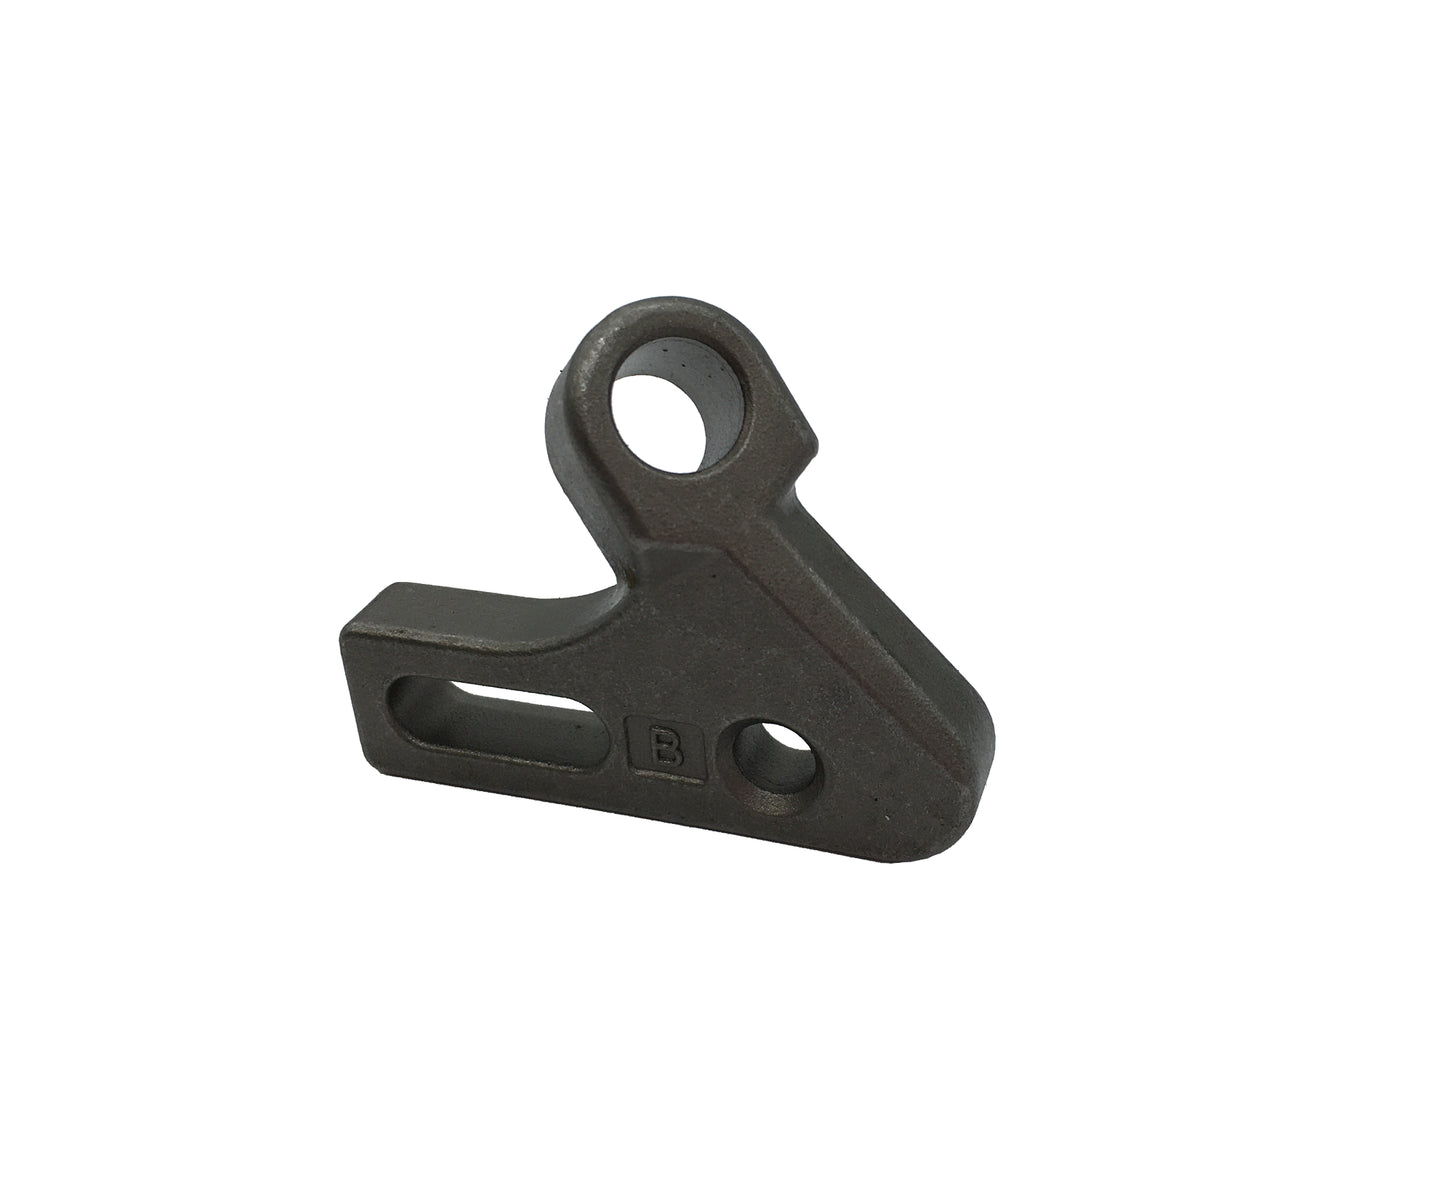 R.H. 4" Cut, Rotating Bit Holder, 135318, for many small Chain Trenchers